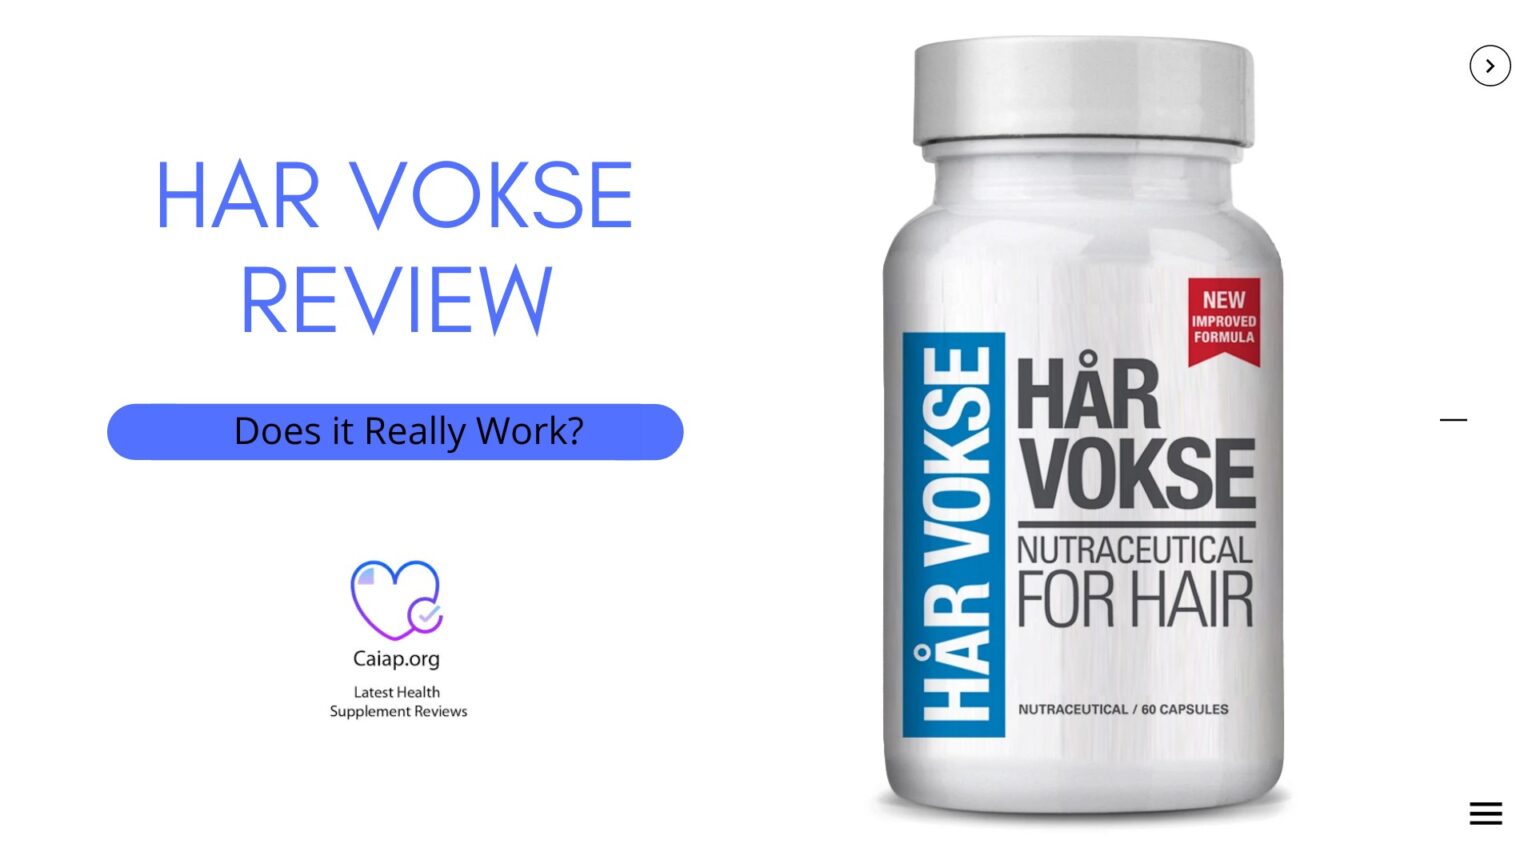 Har Vokse is a product that helps with hair growth. Find out whether its the product for you with these reviews.